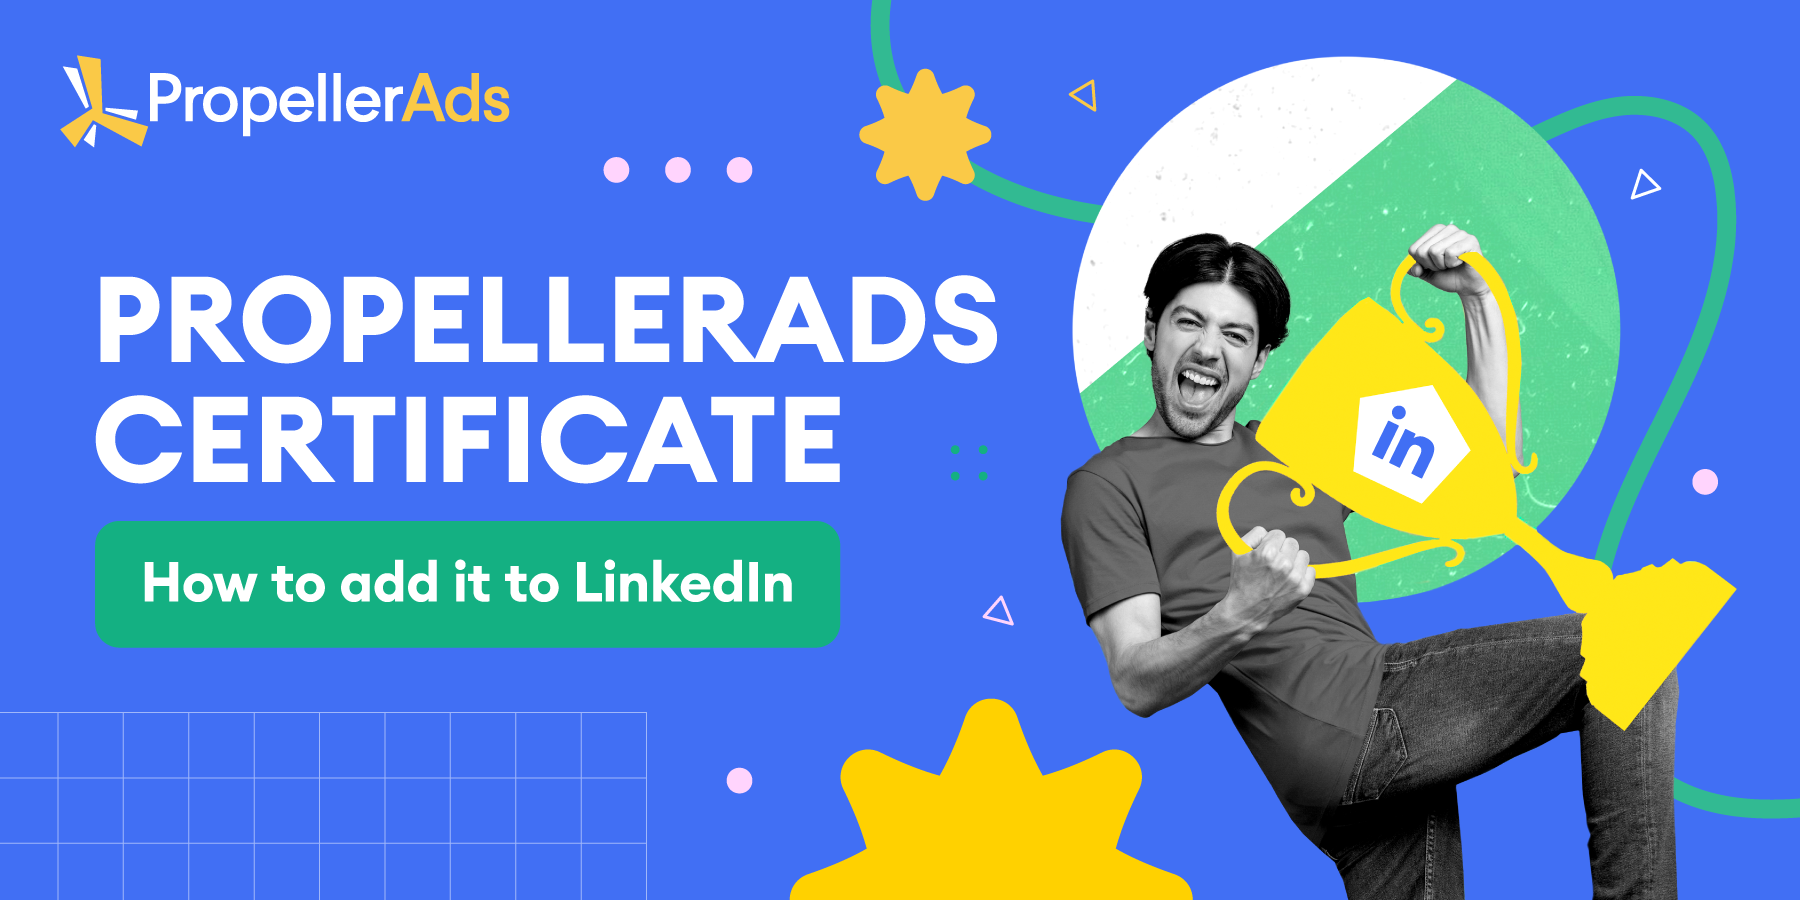 How to add your media buyer certificate to LinkedIn